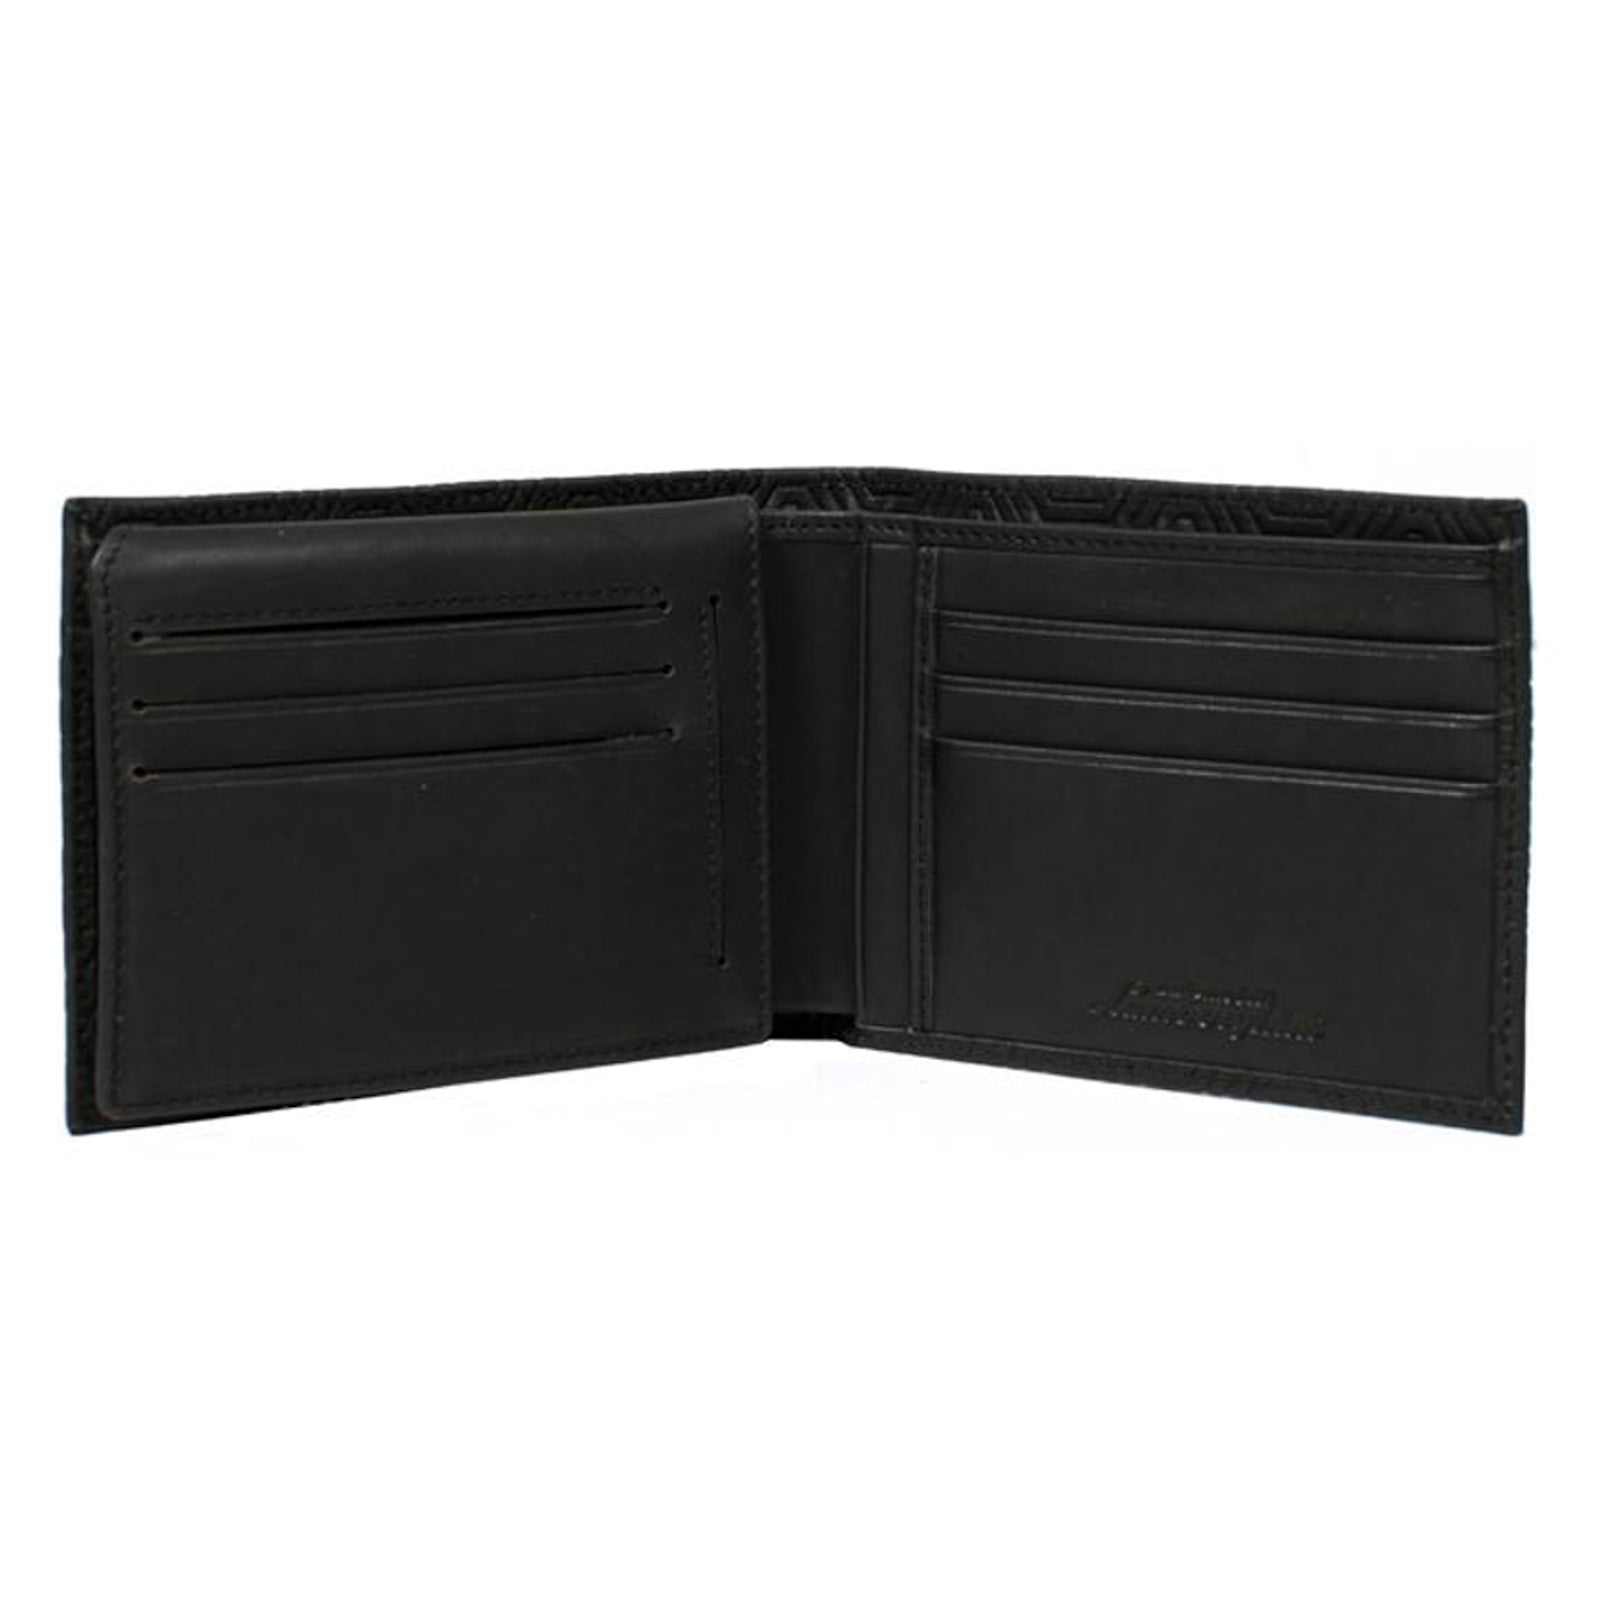 Lamborghini Official Leather Wallet with Card Compartments and Gift Bo